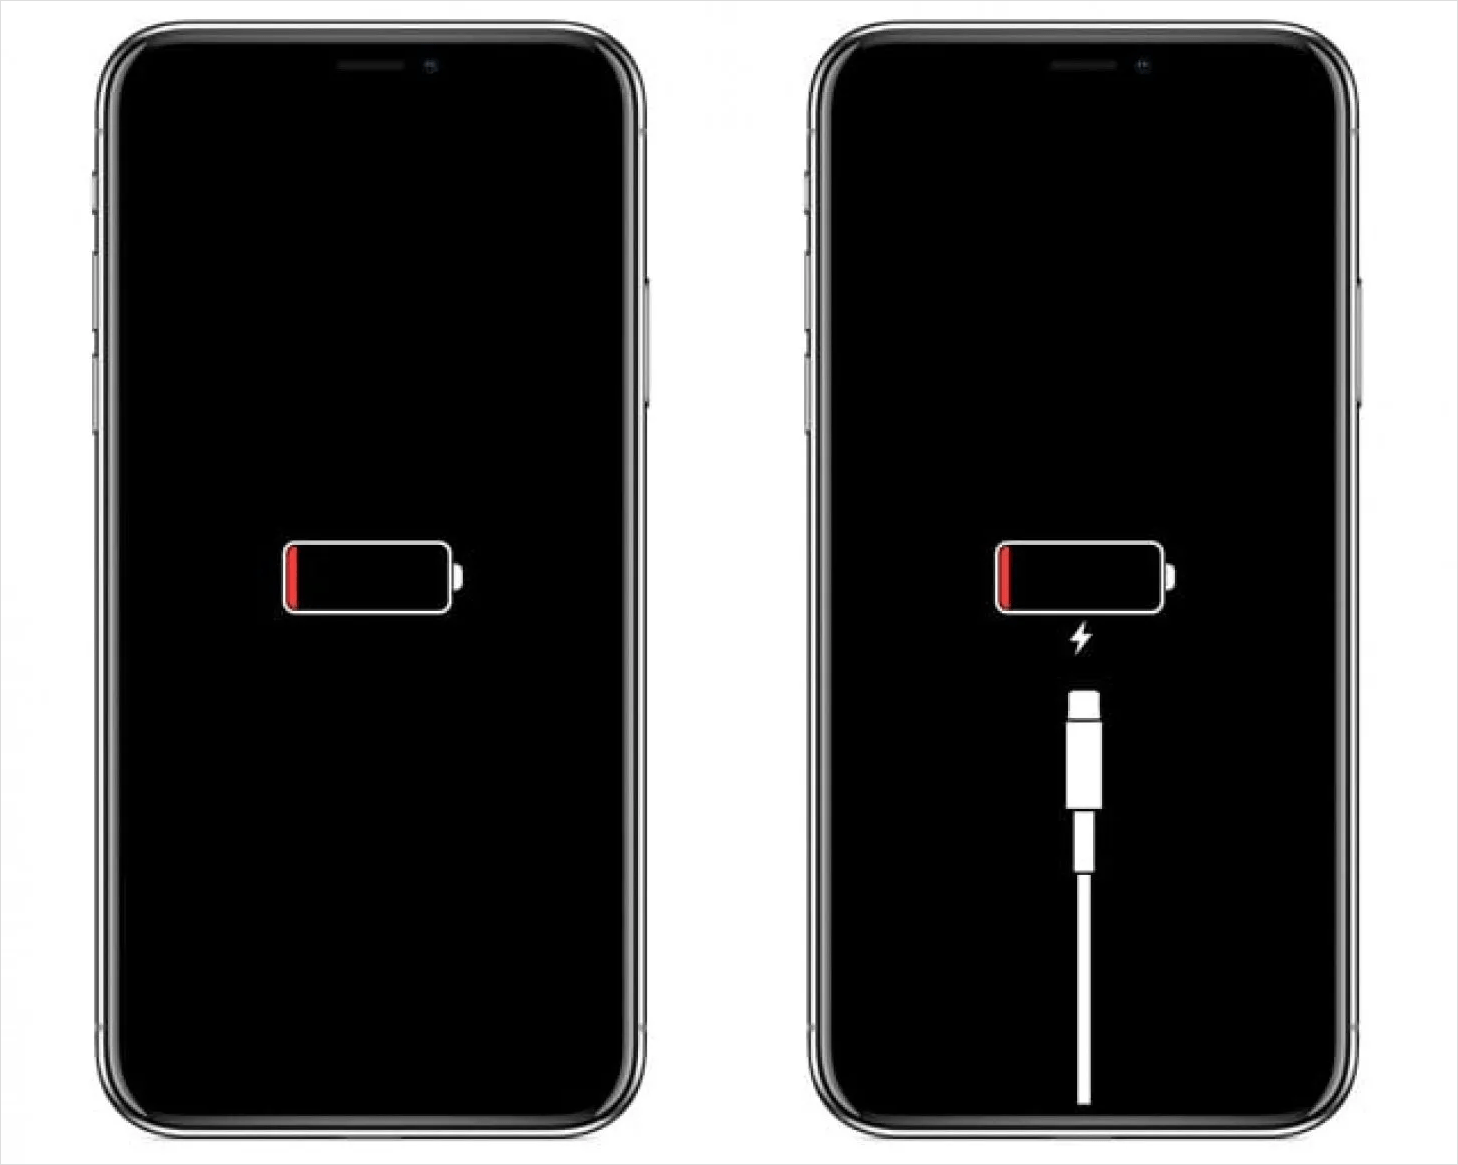 battery icon on iphone black screen